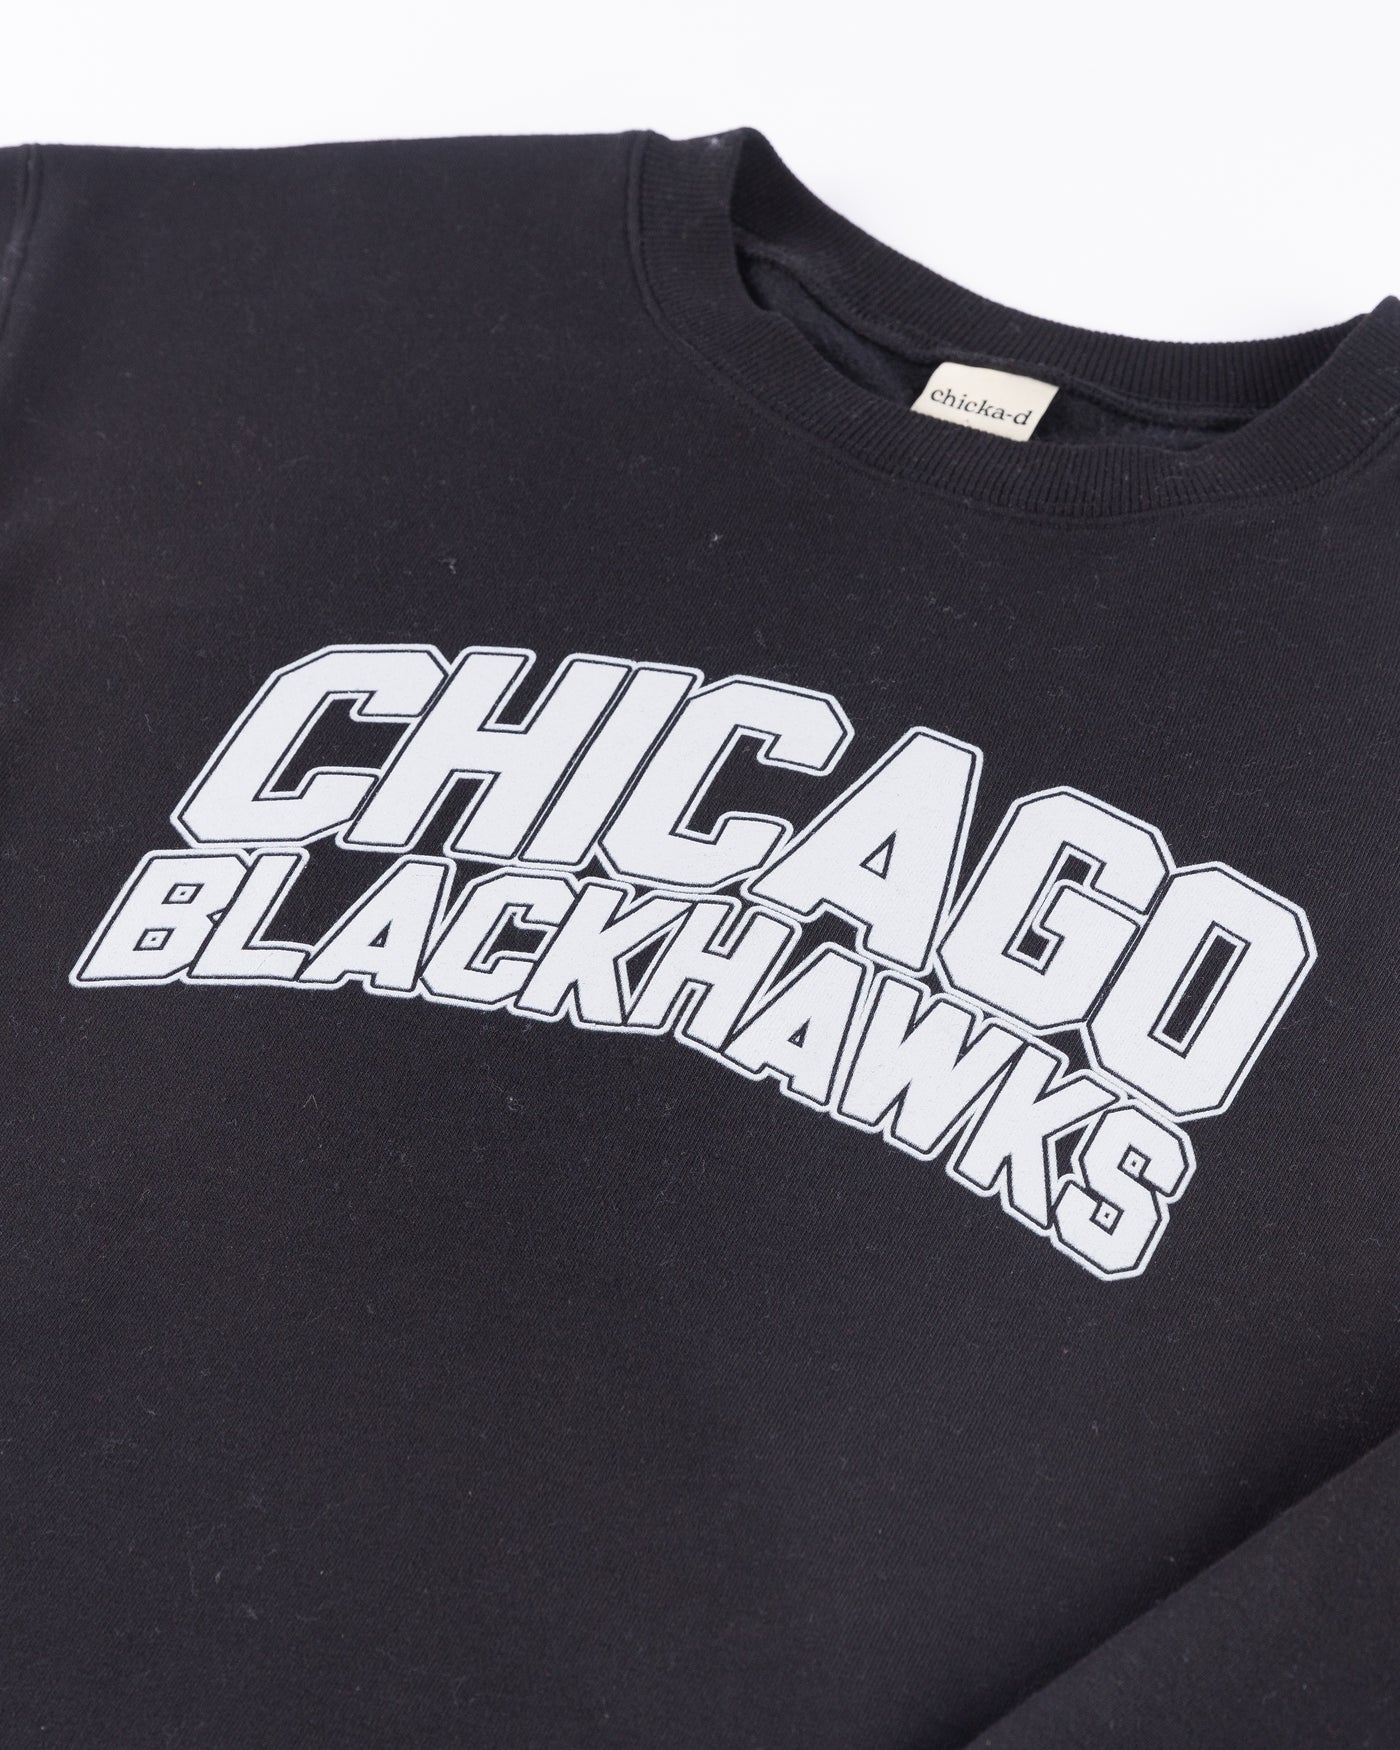 black chicka-d crewneck with Chicago Blackhawks wordmark across front - detail lay flat